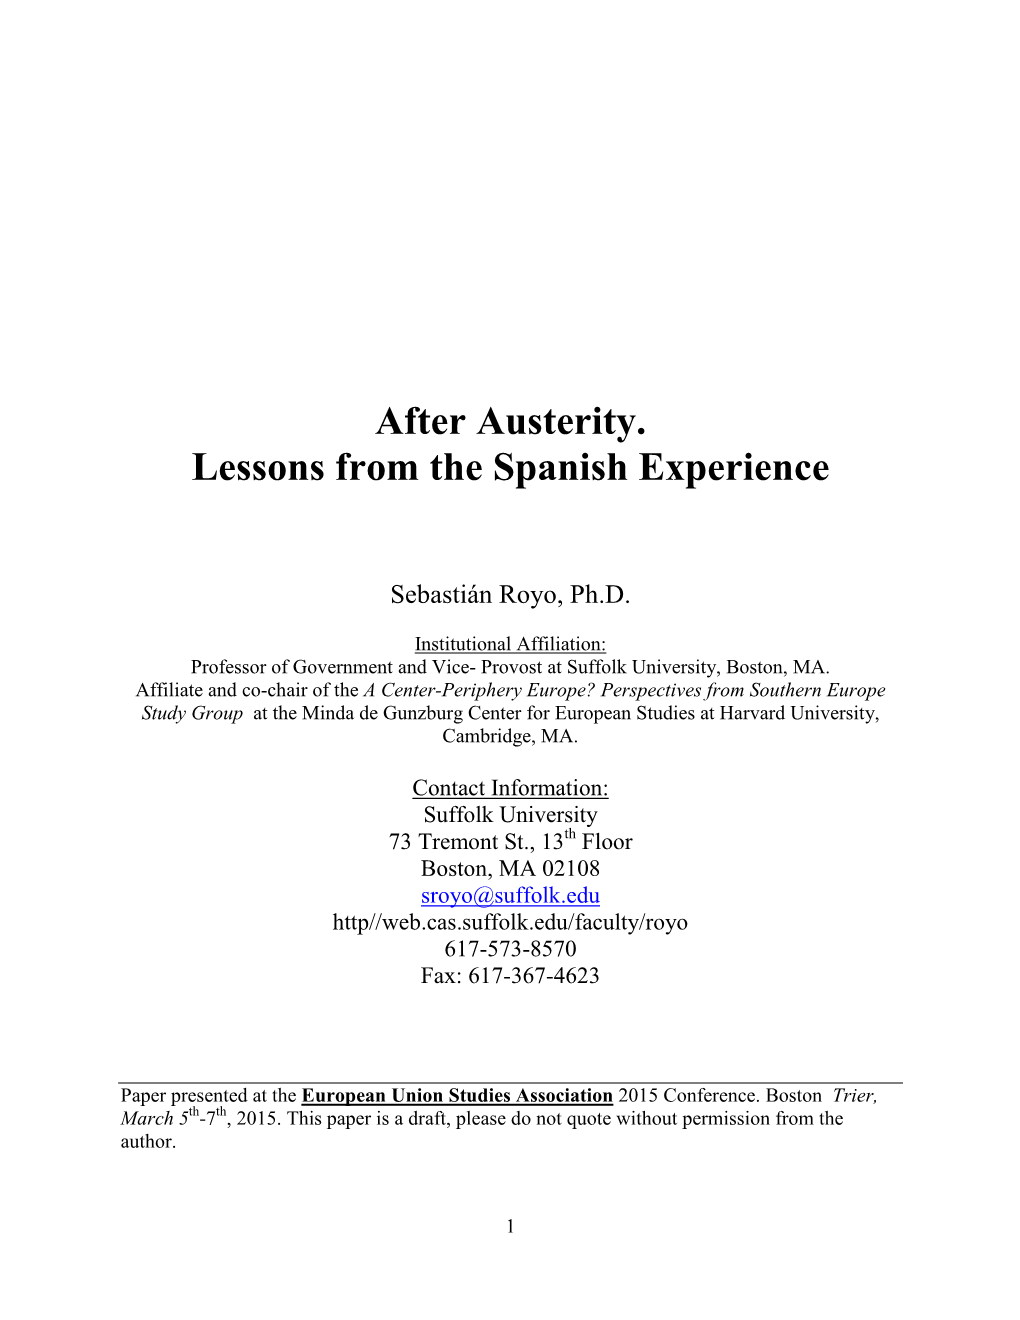 After Austerity. Lessons from the Spanish Experience